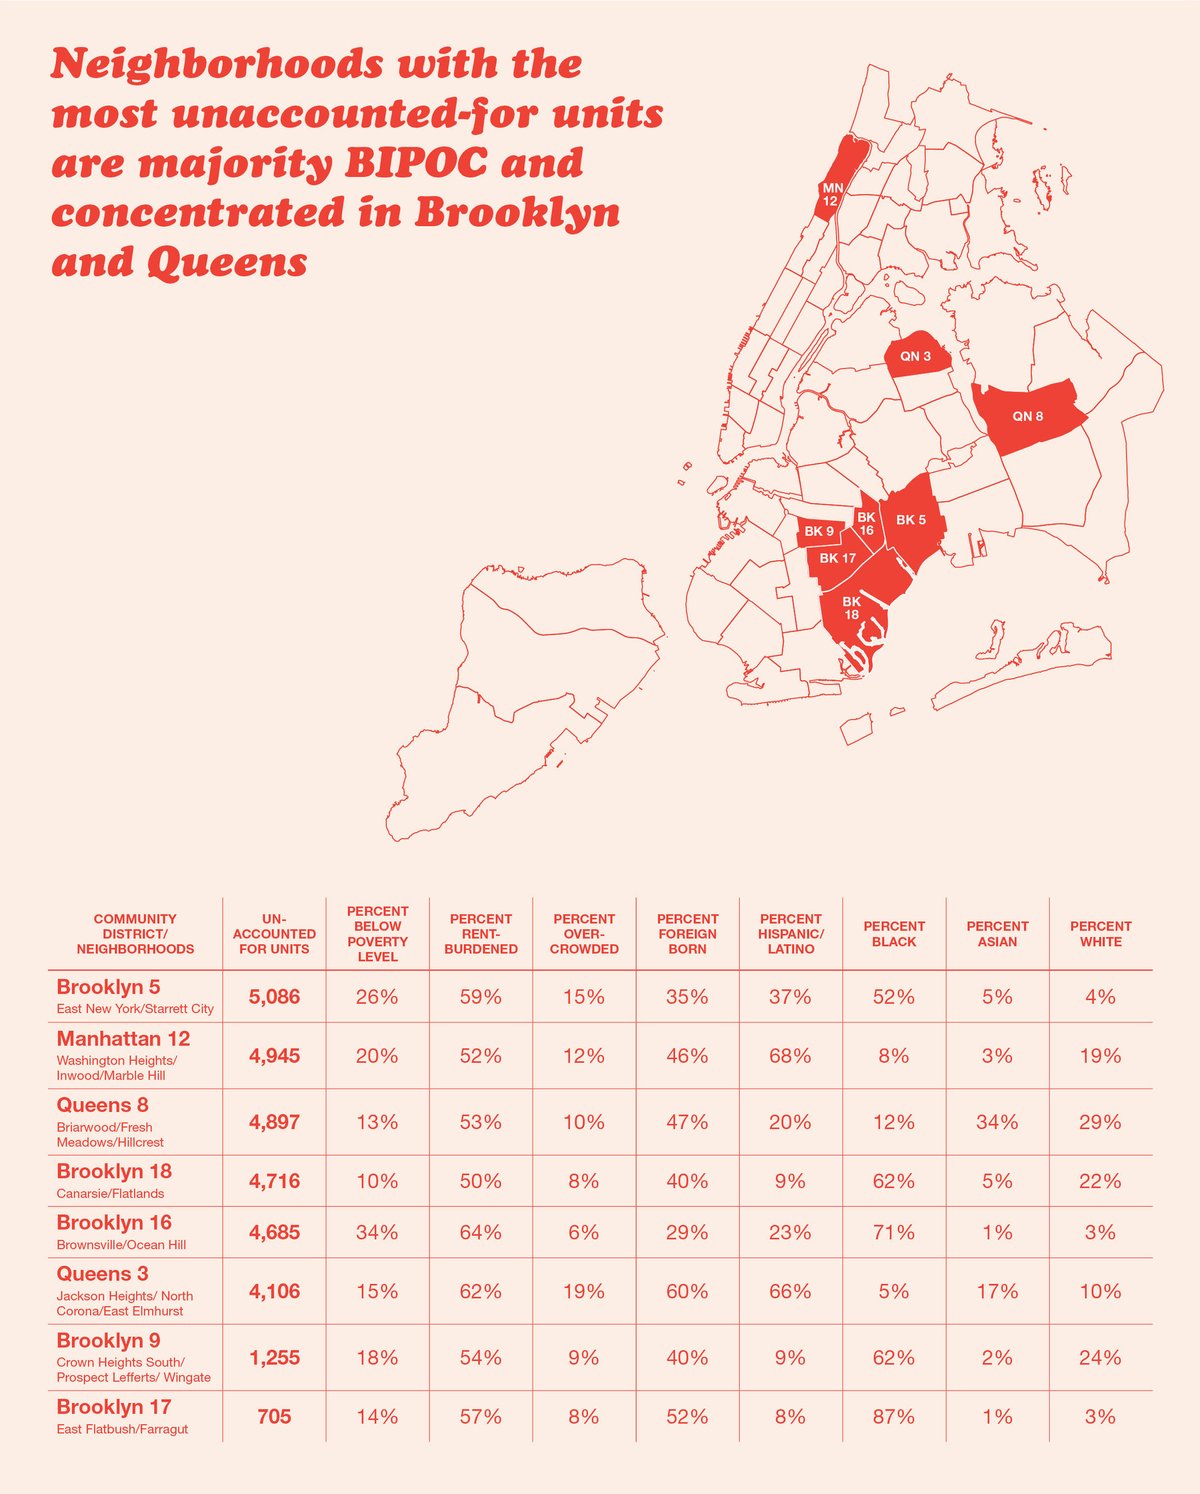 Map of NYC highlighting the 9 community districts where unaccounted-for units are located